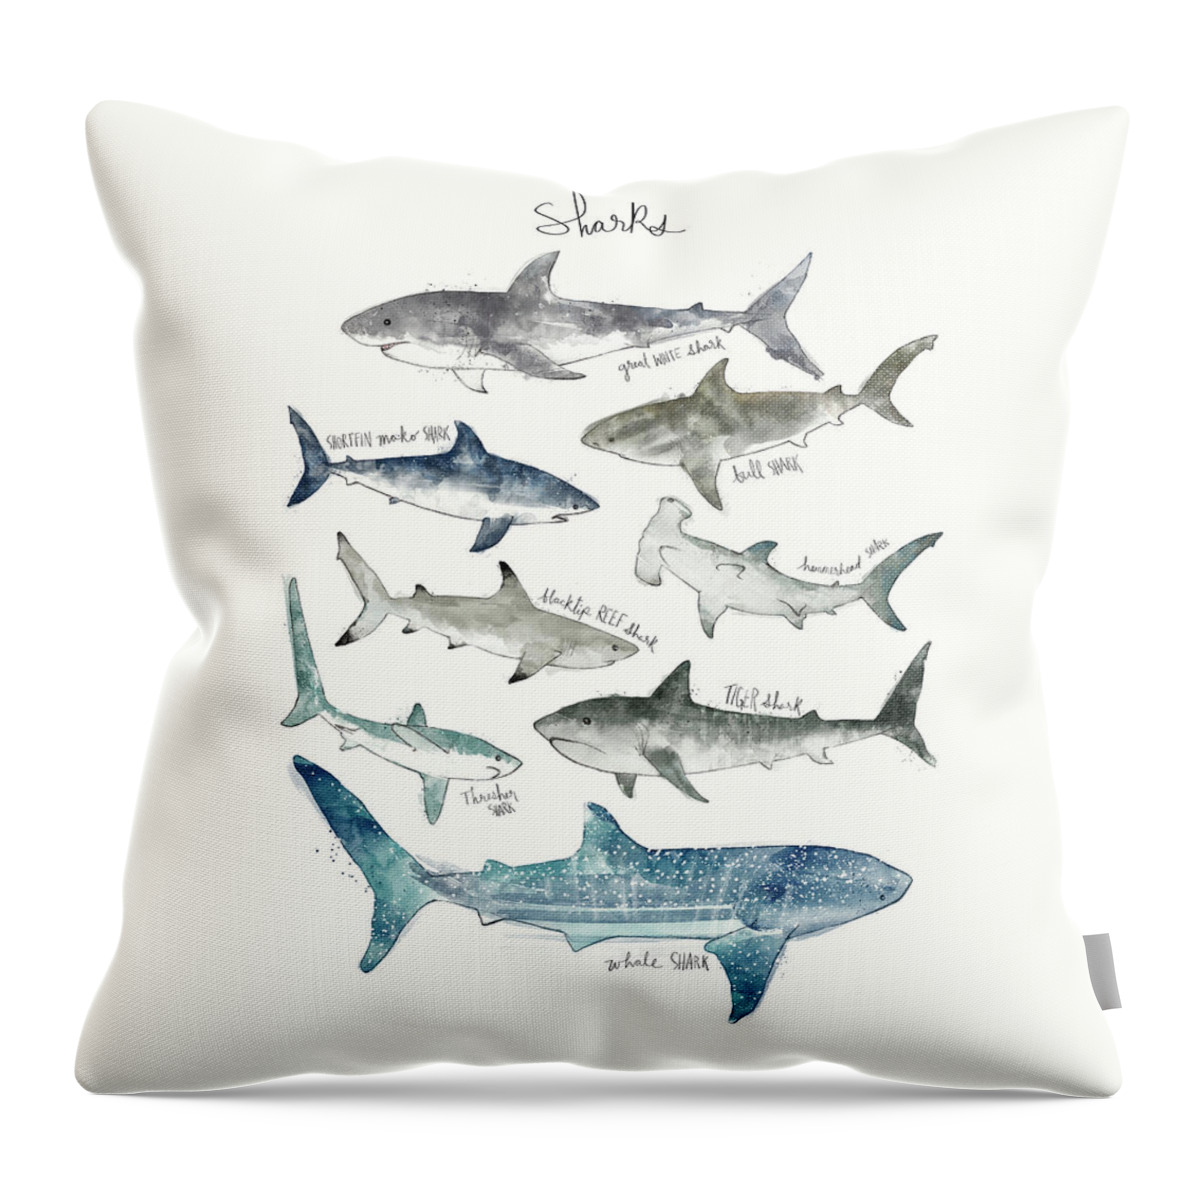 Sharks Throw Pillow featuring the painting Sharks - Landscape Format by Amy Hamilton